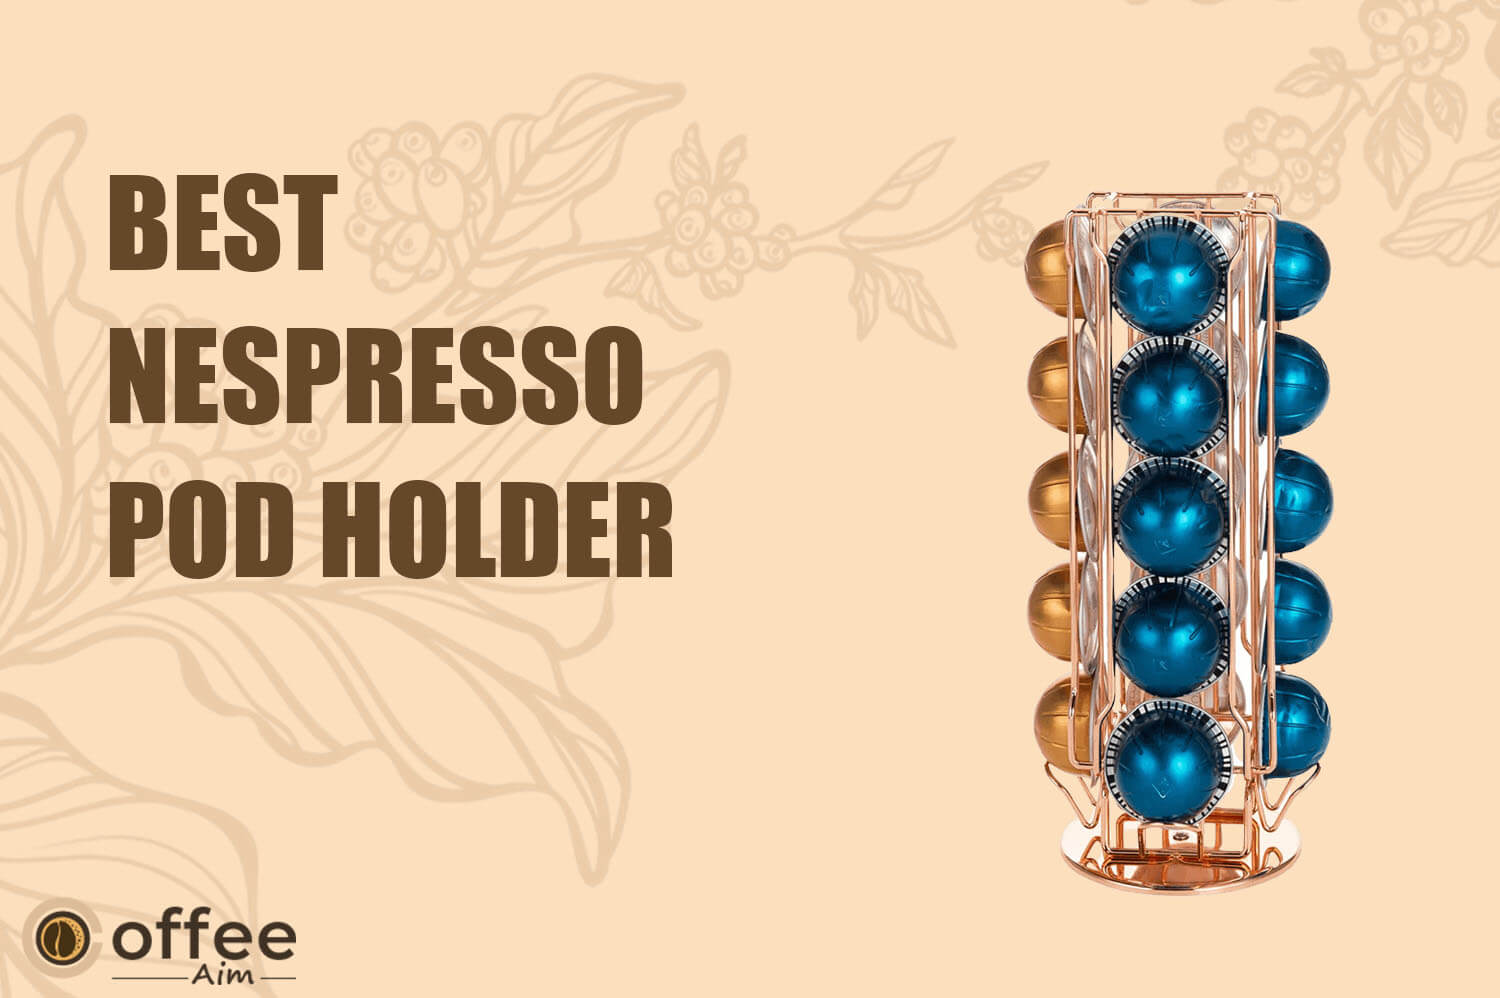 Featured image for the article "Best Nespresso Pod Holder"